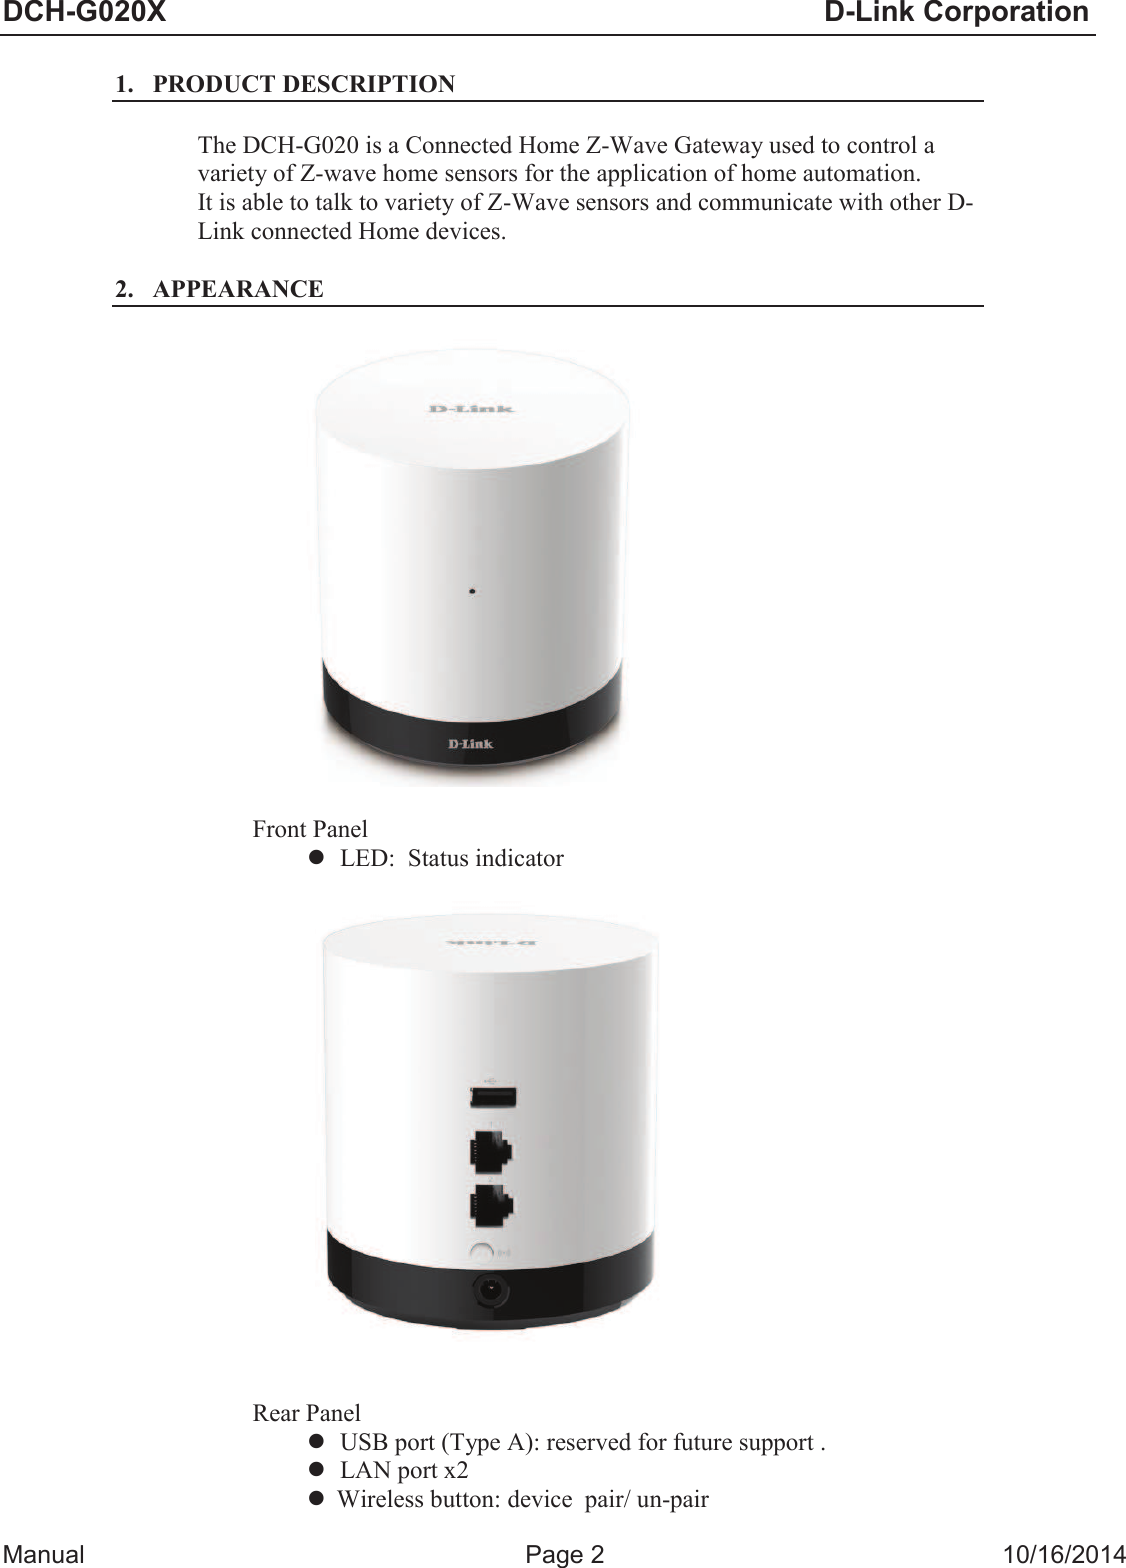 DCH-G020;D-Link CorporationManual  Page 2  10/16/2014 1. PRODUCT DESCRIPTIONThe DCH-G020 is a Connected Home Z-Wave Gateway used to control a variety of Z-wave home sensors for the application of home automation. It is able to talk to variety of Z-Wave sensors and communicate with other D-Link connected Home devices. 2. APPEARANCEFront Panel lLED:  Status indicatorRear Panel lUSB port (Type A): reserved for future support .lLAN port x2lWireless button: device  pair/ un-pair